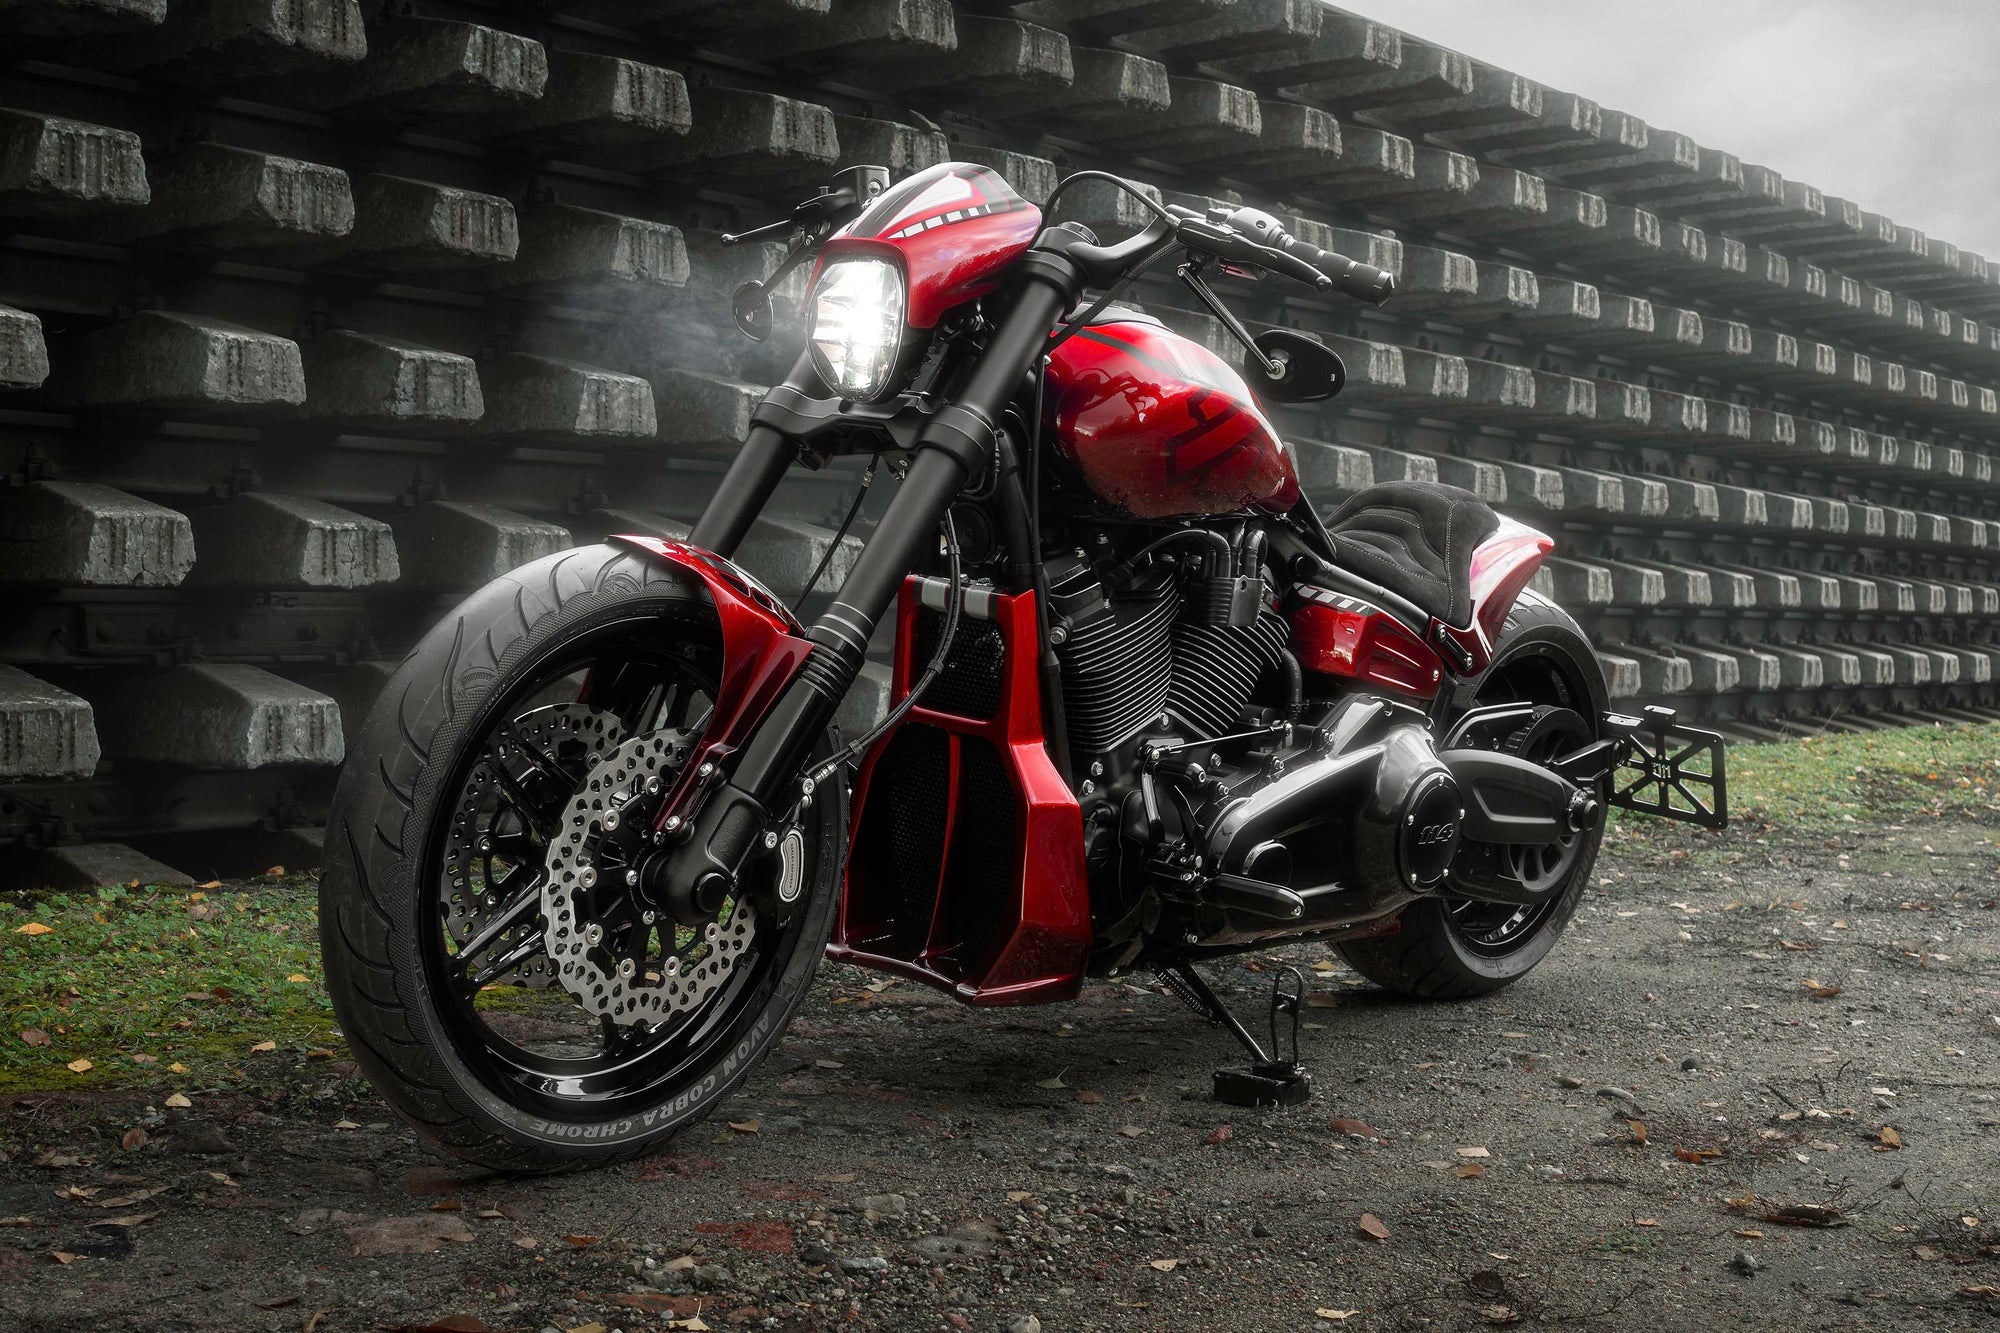 Harley Davidson motorcycle with Killer Custom parts from the side outside on a gloomy day in an industrial environment